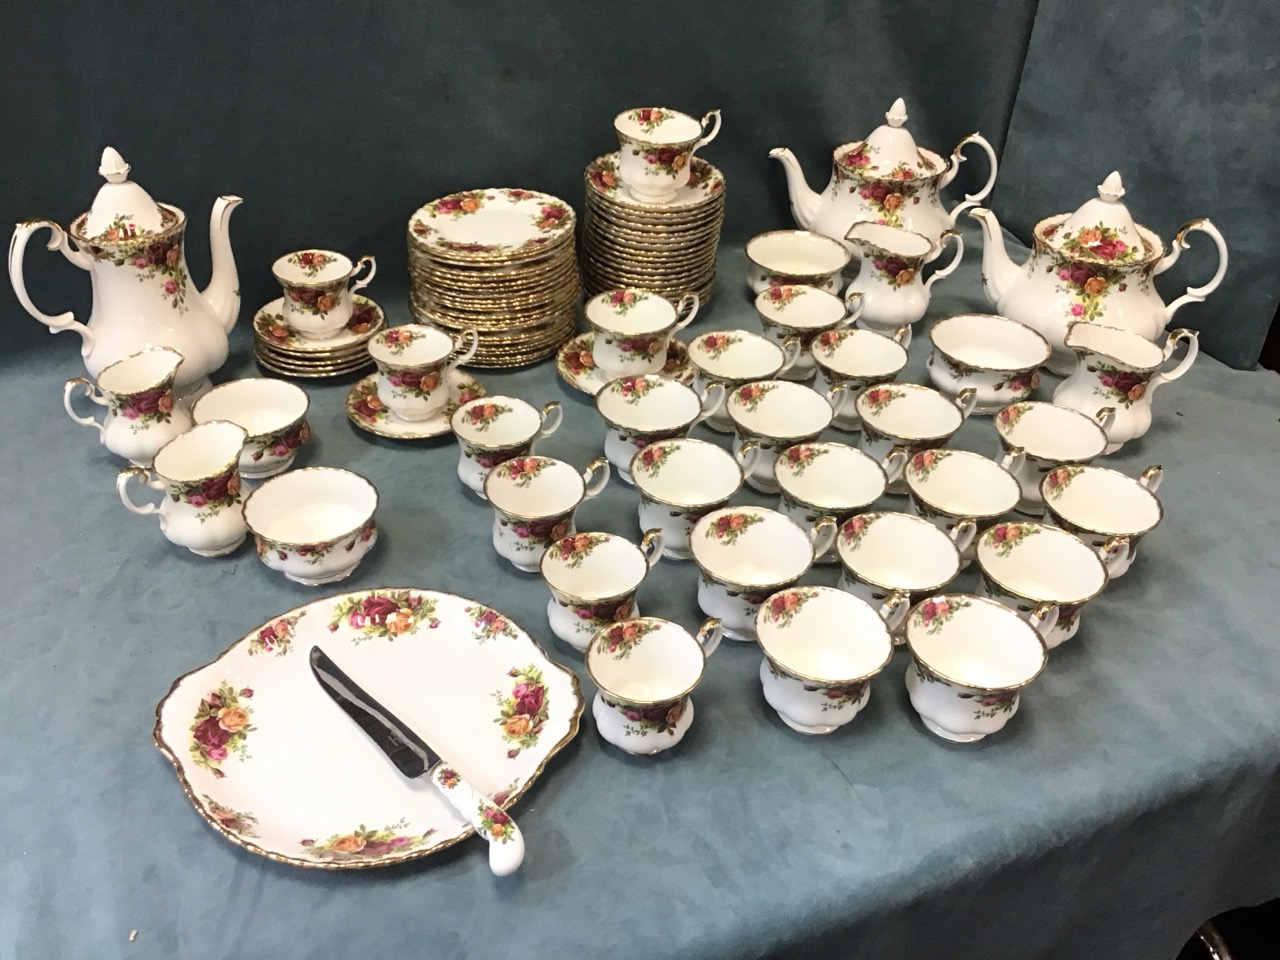 An extensive Royal Albert tea & coffee service in the Old Country Roses pattern - cups & saucers,